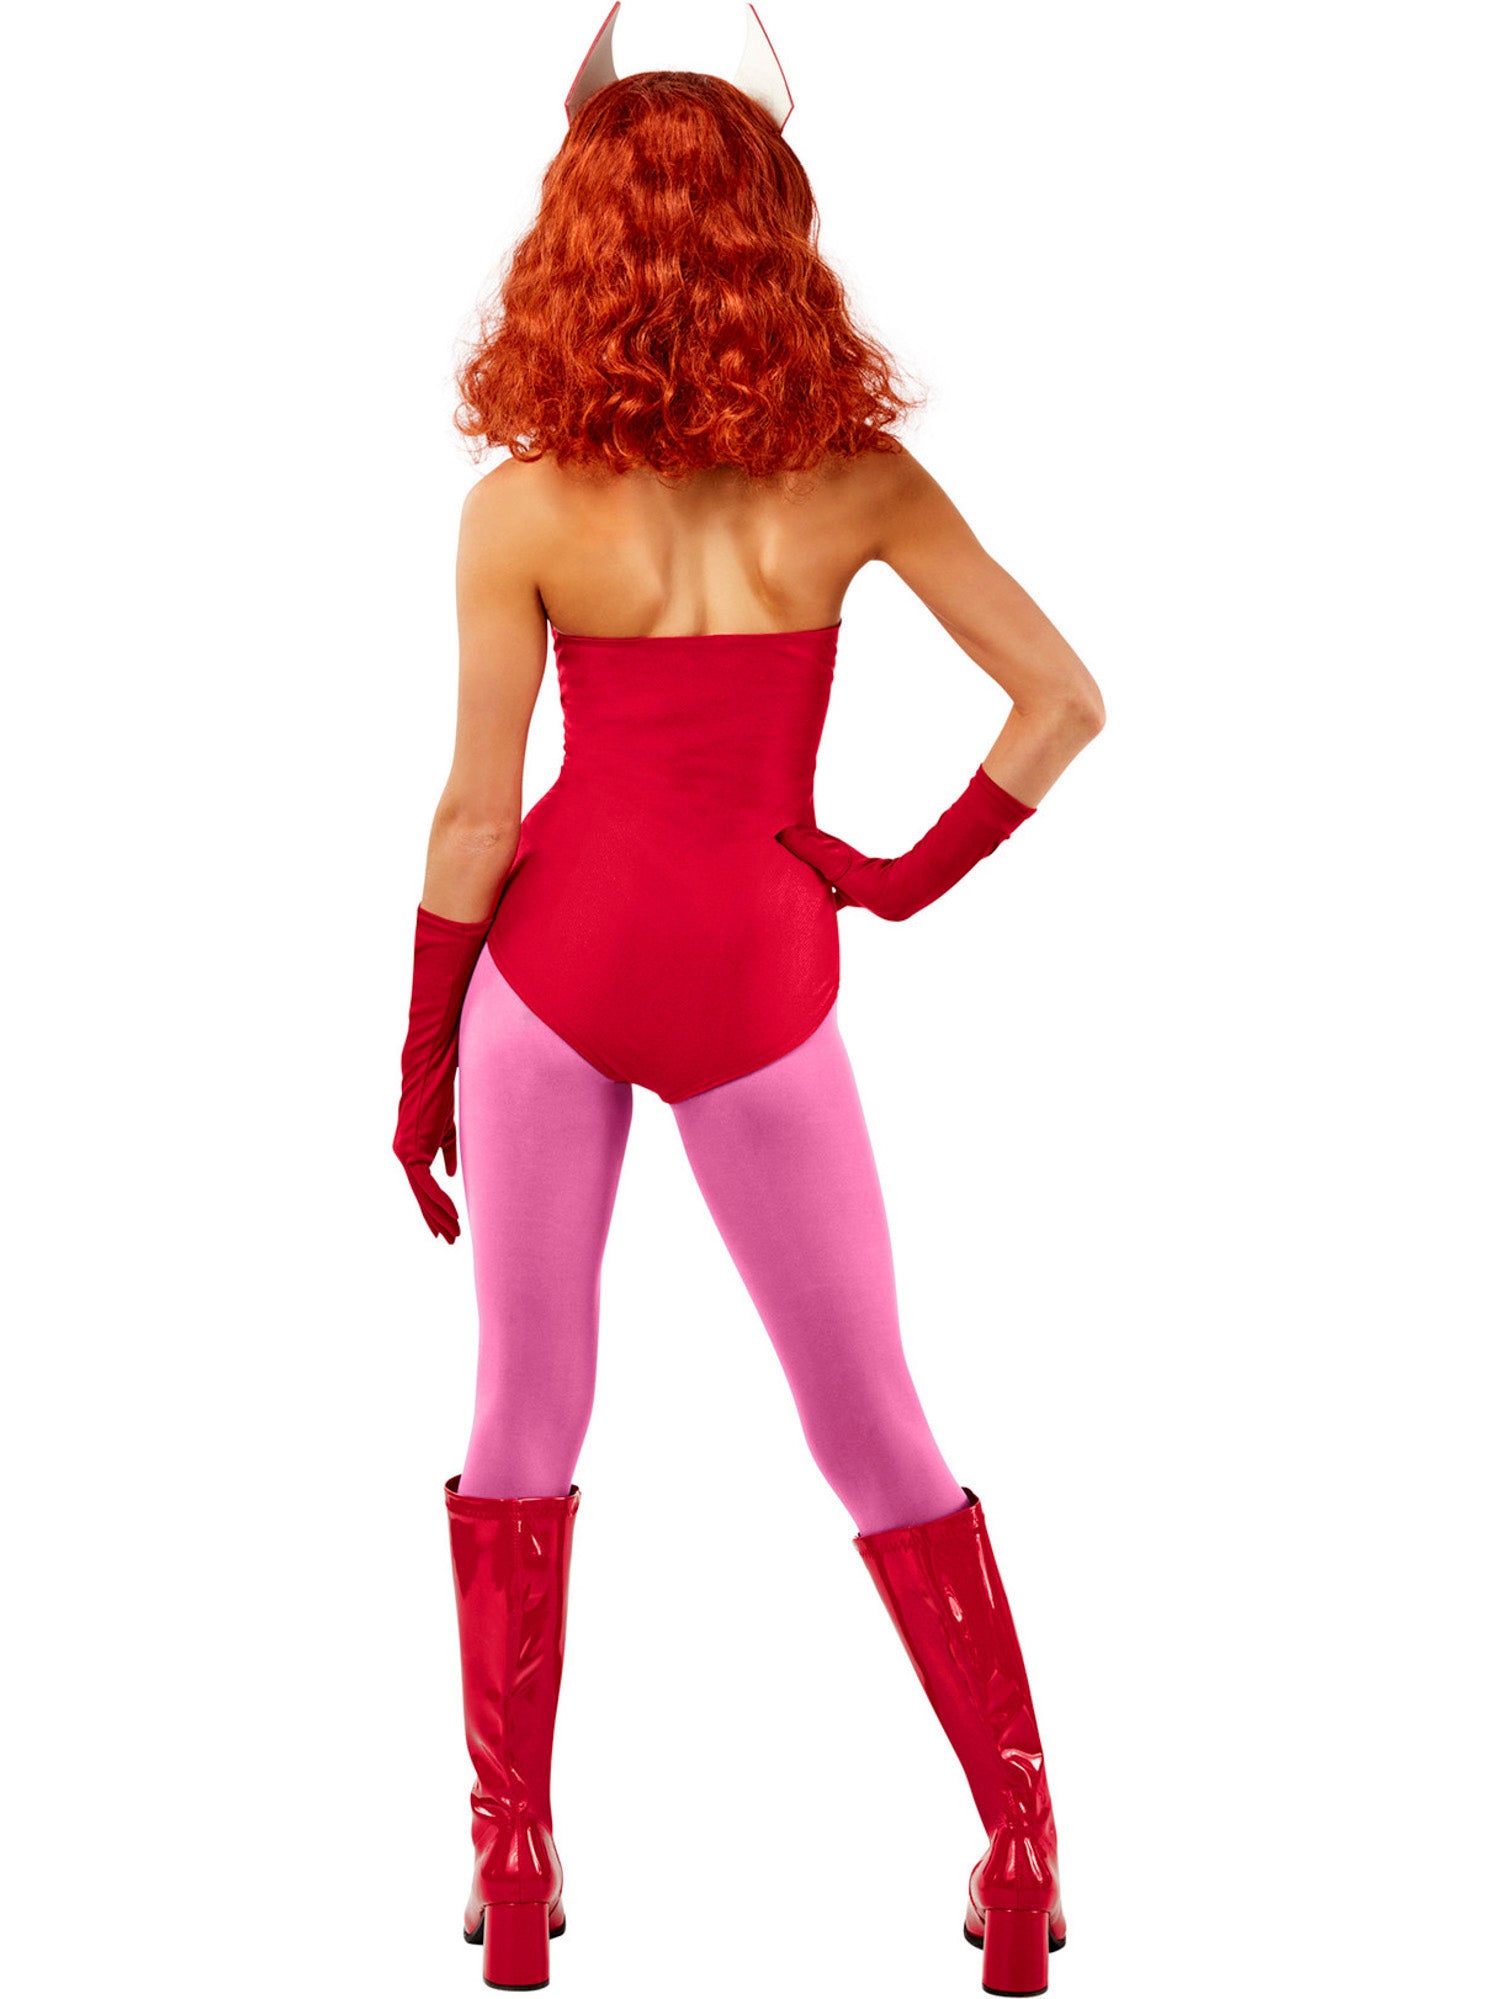 Women's Marvel Wanda Vision Scarlet Witch Costume - costumes.com